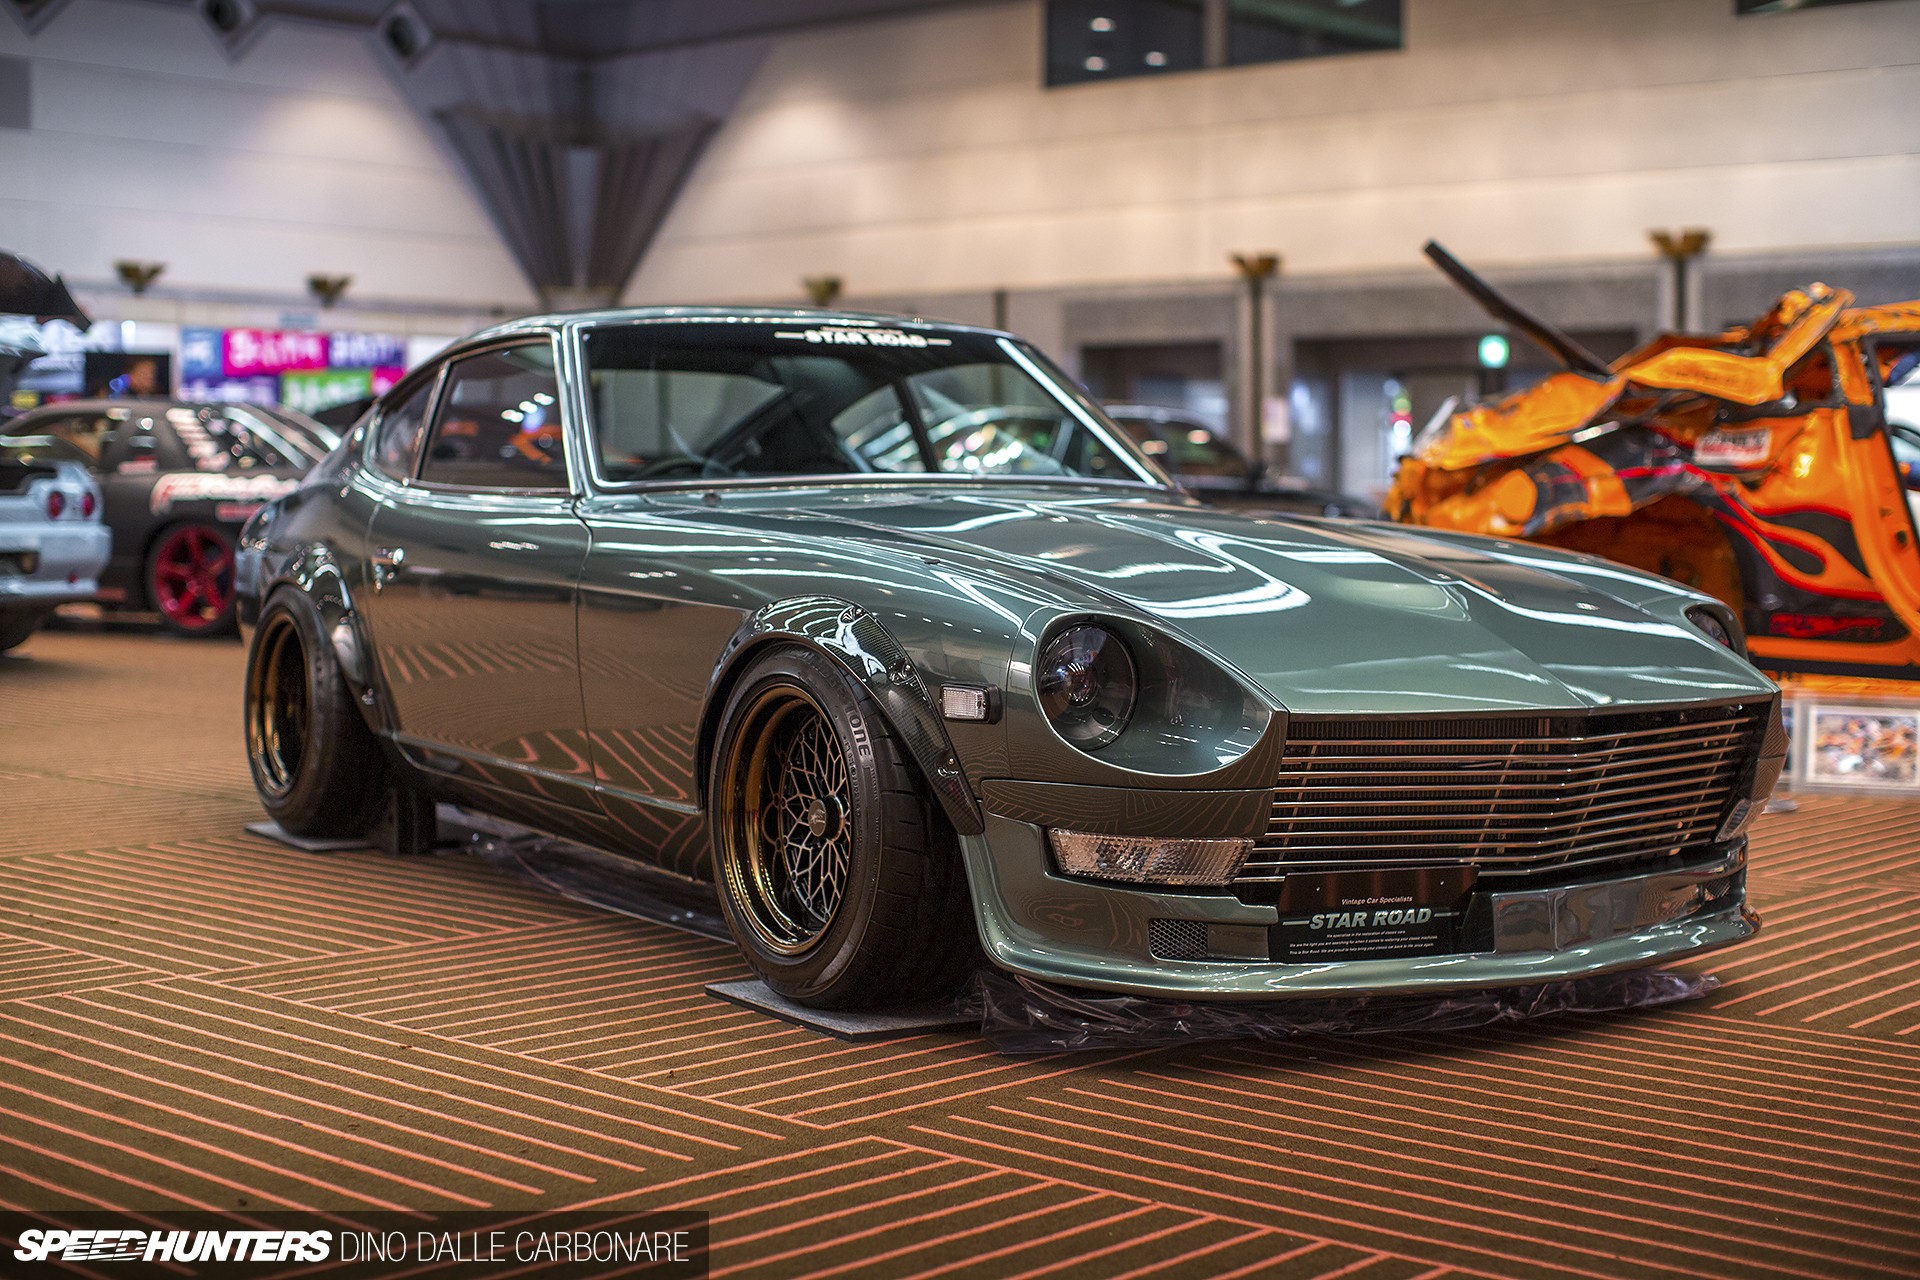 General 1920x1280 car Speedhunters car show modified Nissan Nissan Fairlady Z BBS Japan Tokyo Nissan S30 bolt-on fender flares vehicle